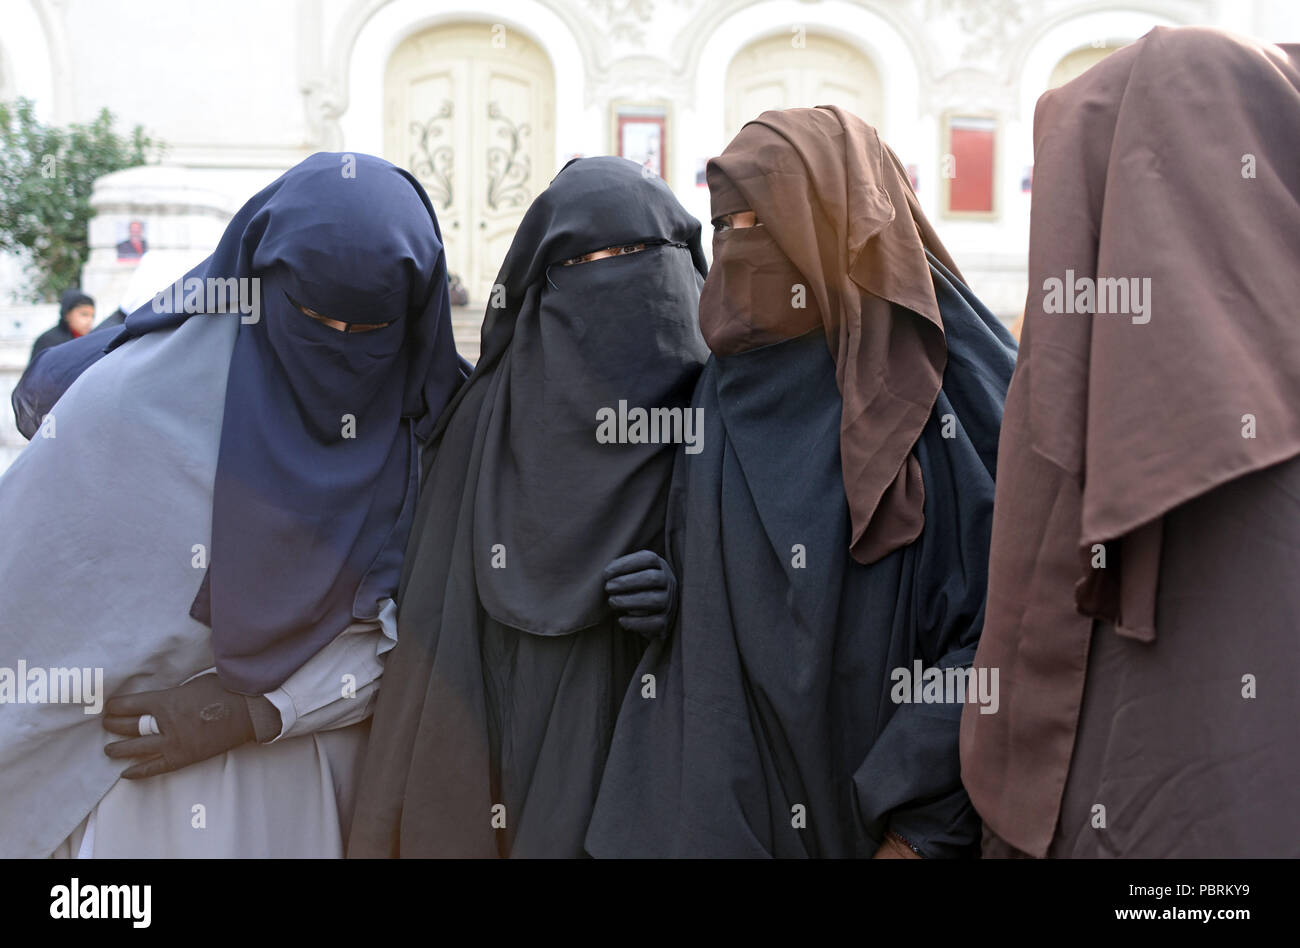 February 15, 2013 - Tunis, Tunisia: Salafi Islamist women in niqab argue  with a man in front of Tunis national theatre, a place where political  demonstrations are usually held. Des Tunisiennes portant